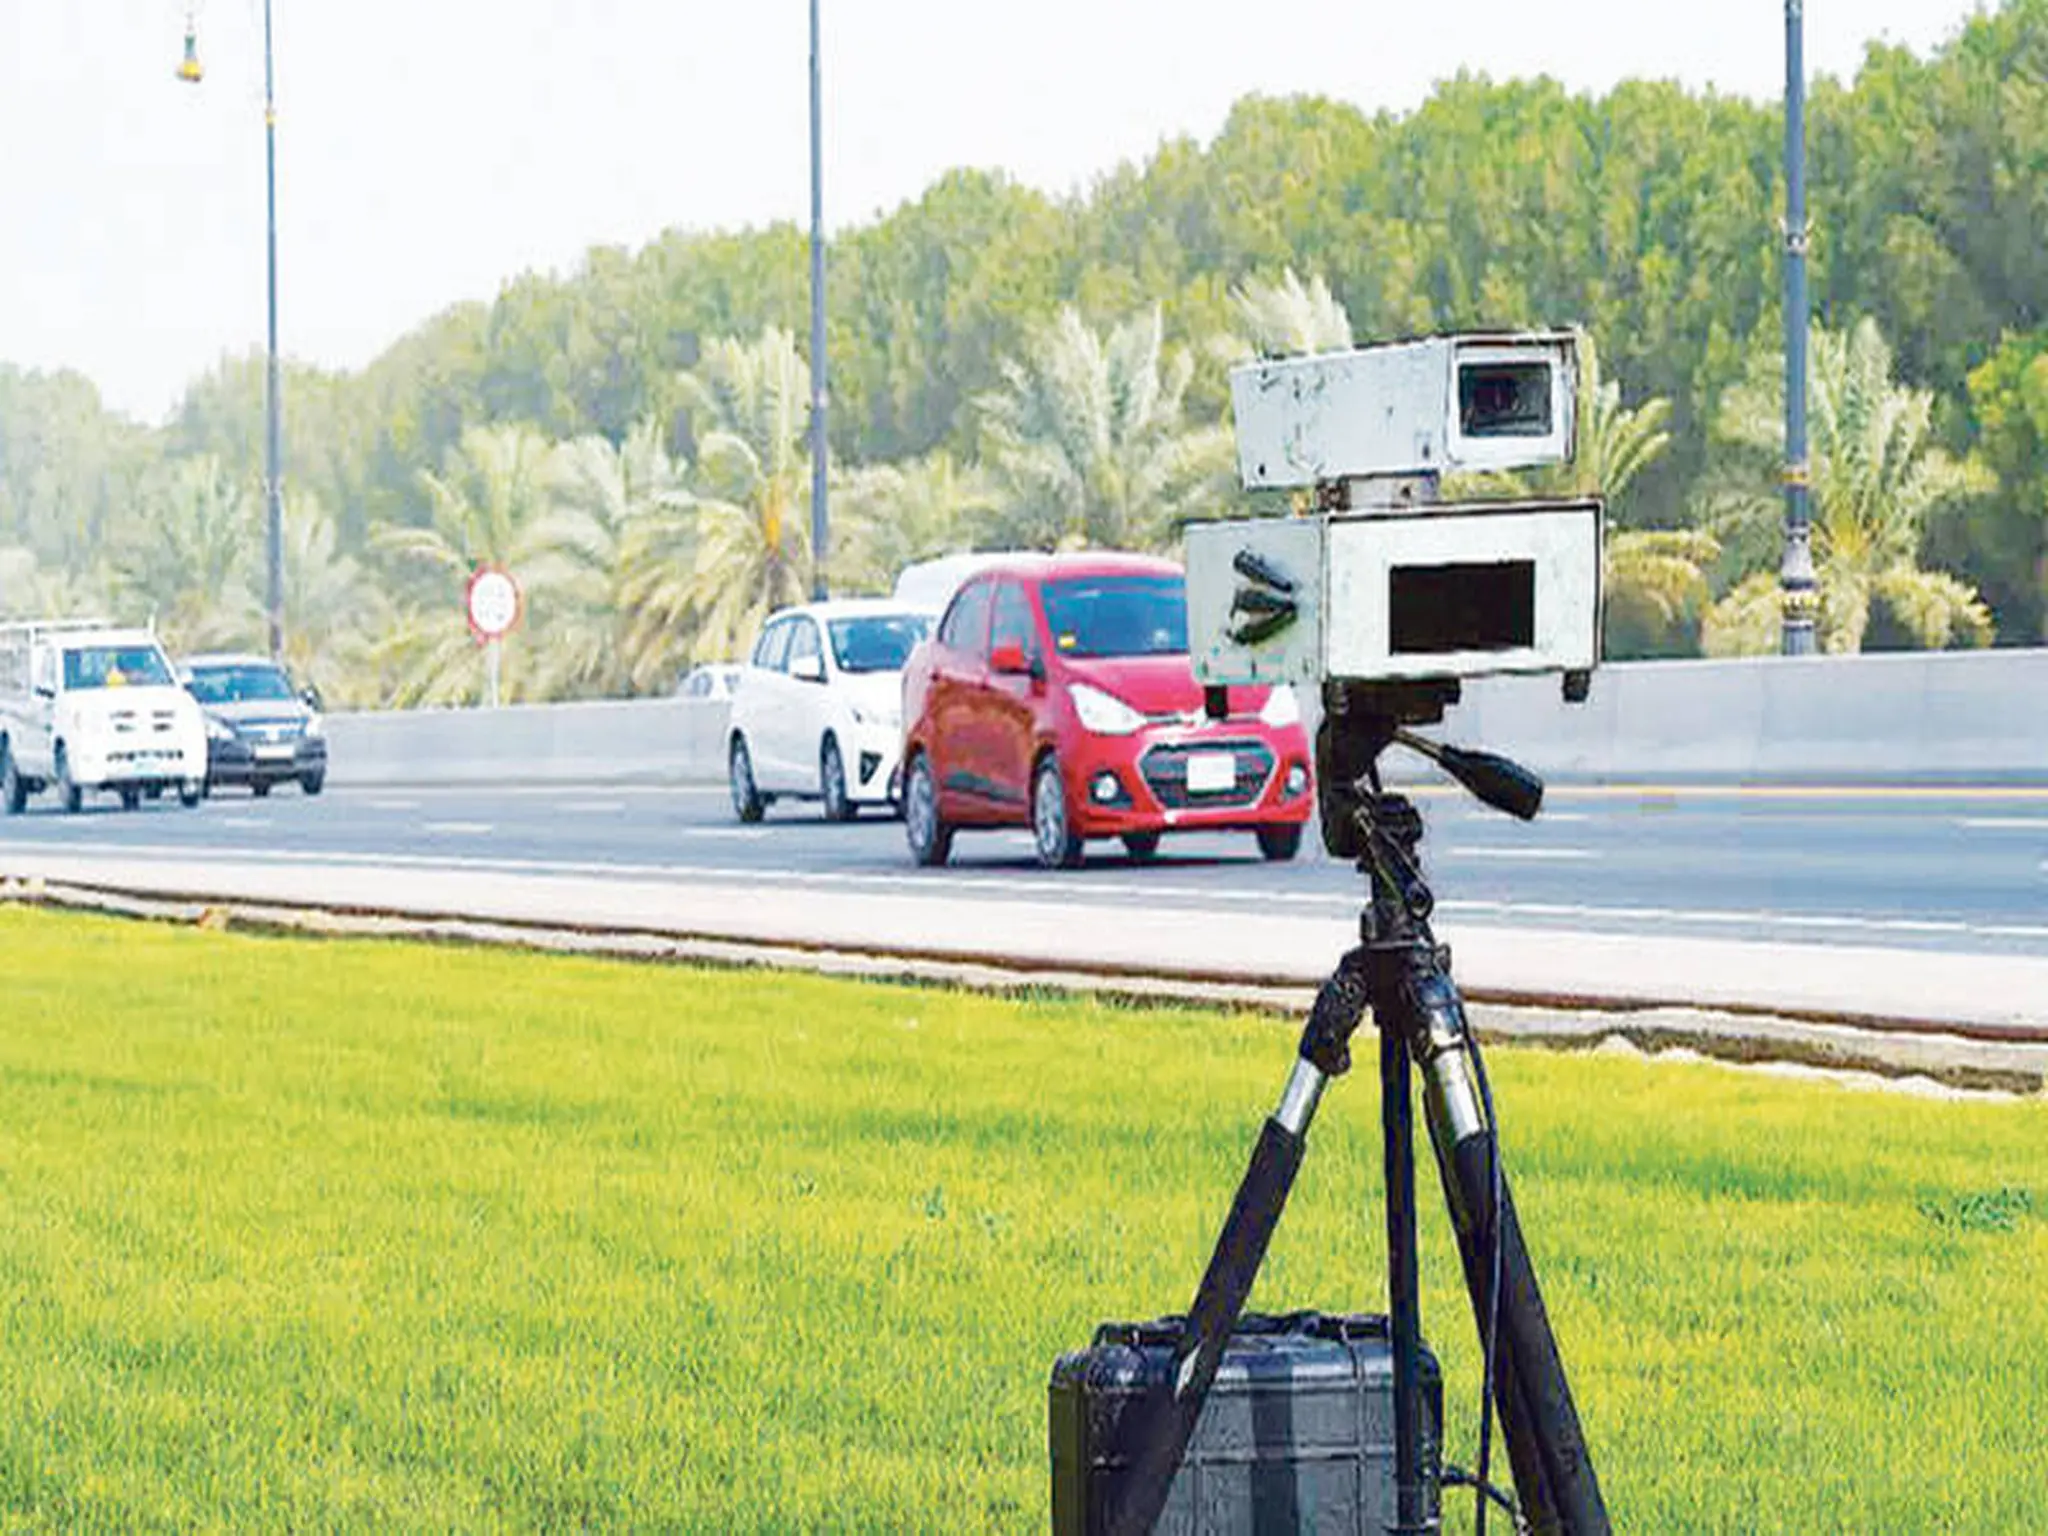 Cases of punishing drivers in the UAE by paying a fine of 1,000 dirhams and 4 traffic points